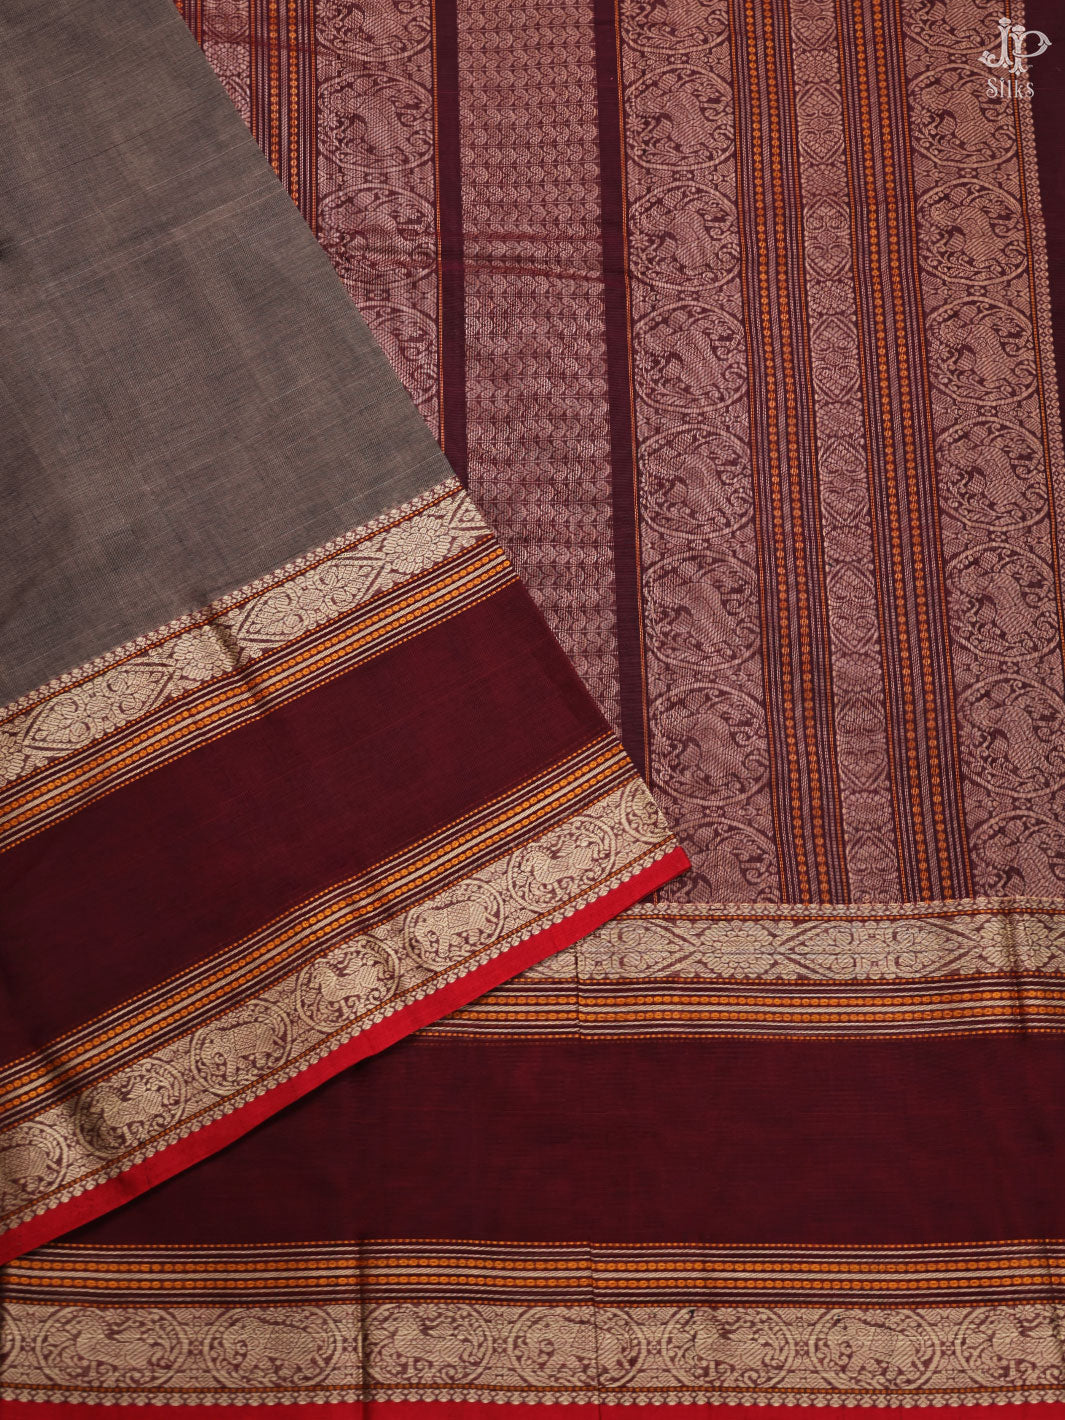 Sandalwood Brown and Maroon Pure Kanchi Cotton Saree - D9716 - View 4